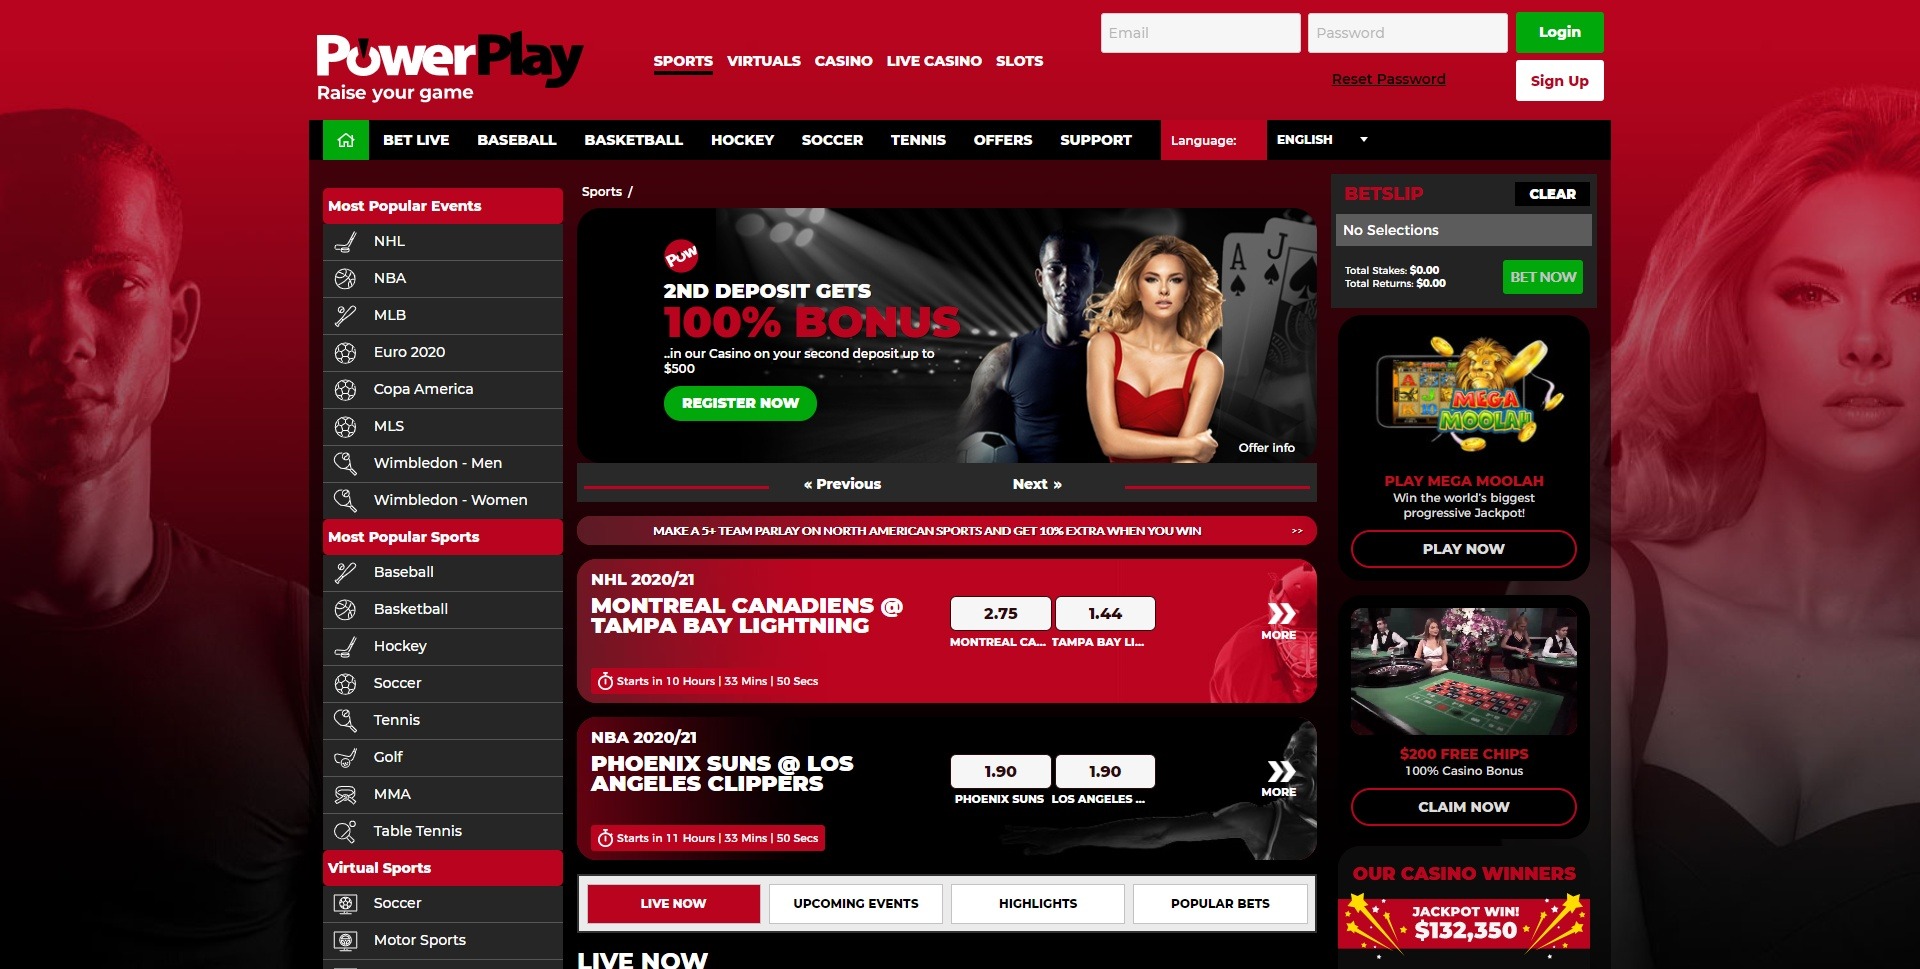 Review of the PowerPlay Sportsbook